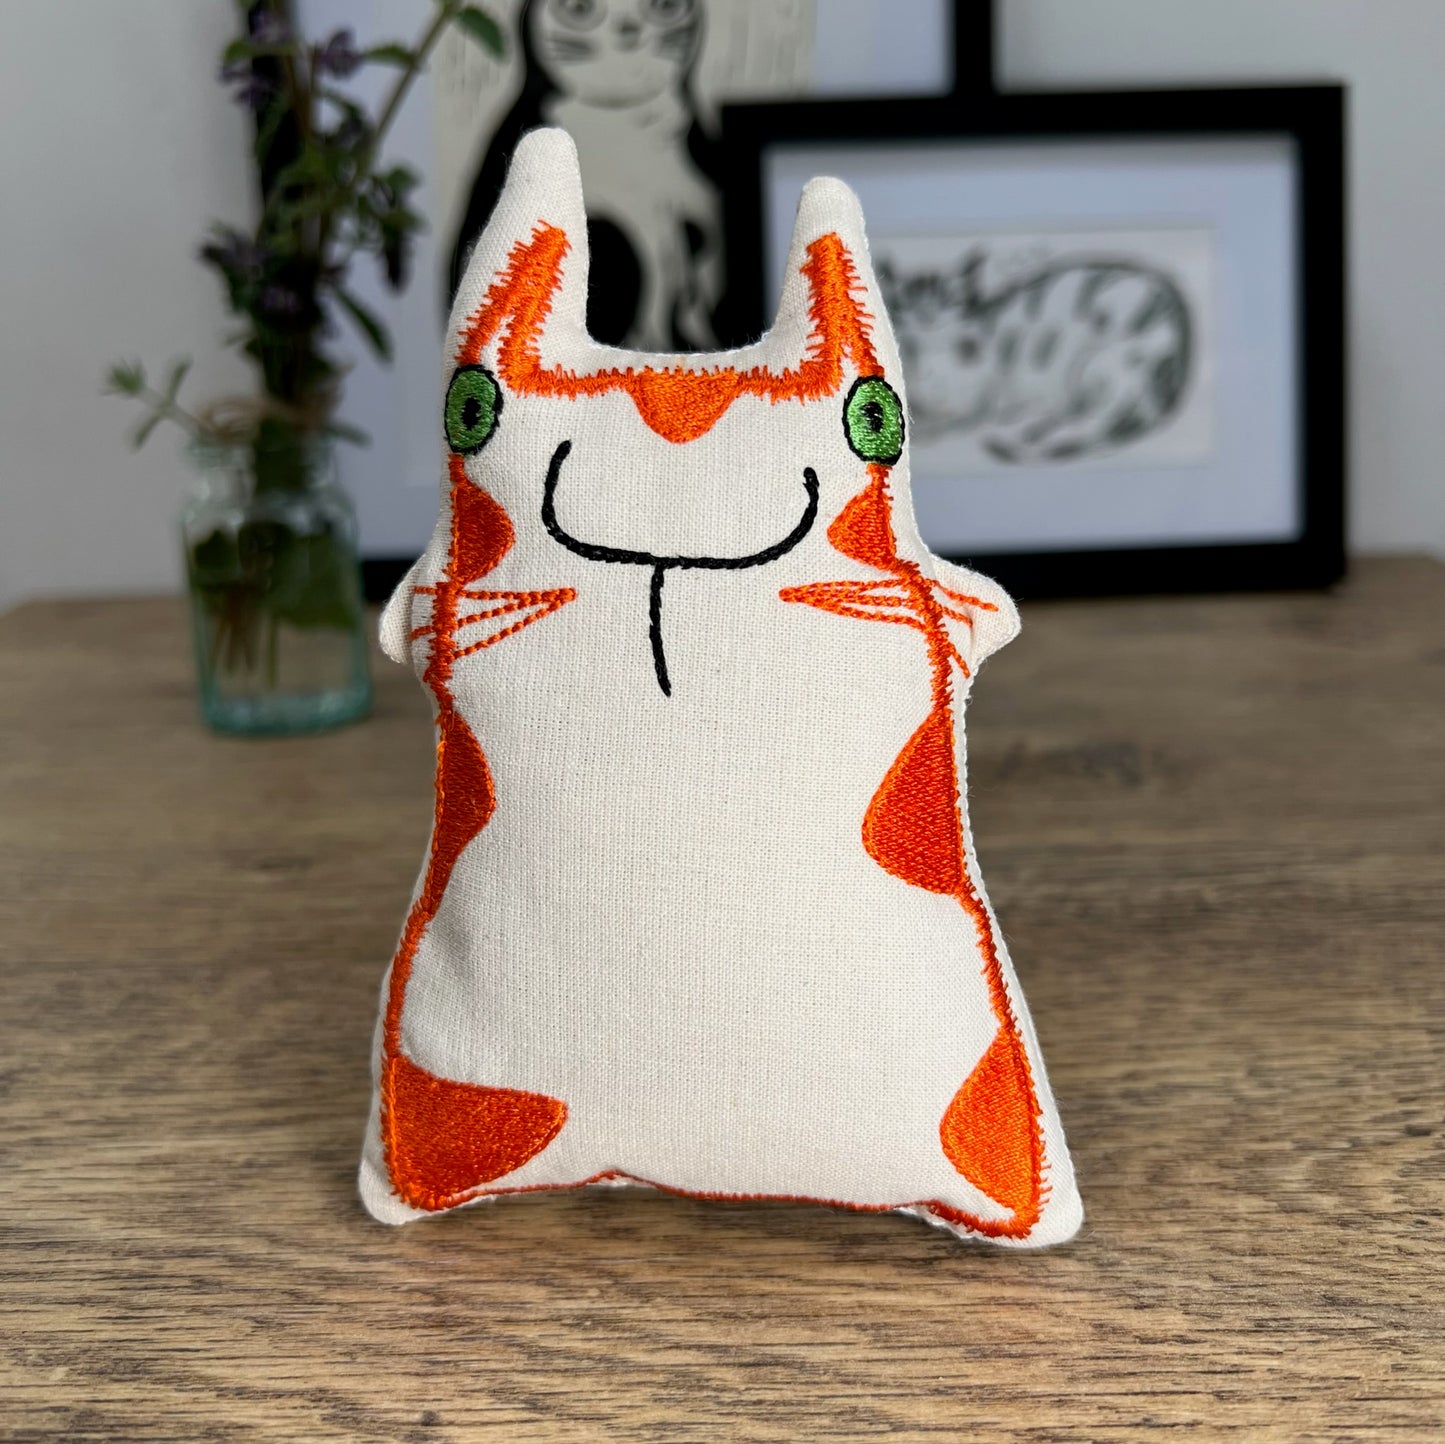 Freak Meowt Luxury Cat Toys, Gifts for Cats  Kevin the Cat, Handmade in Wales 